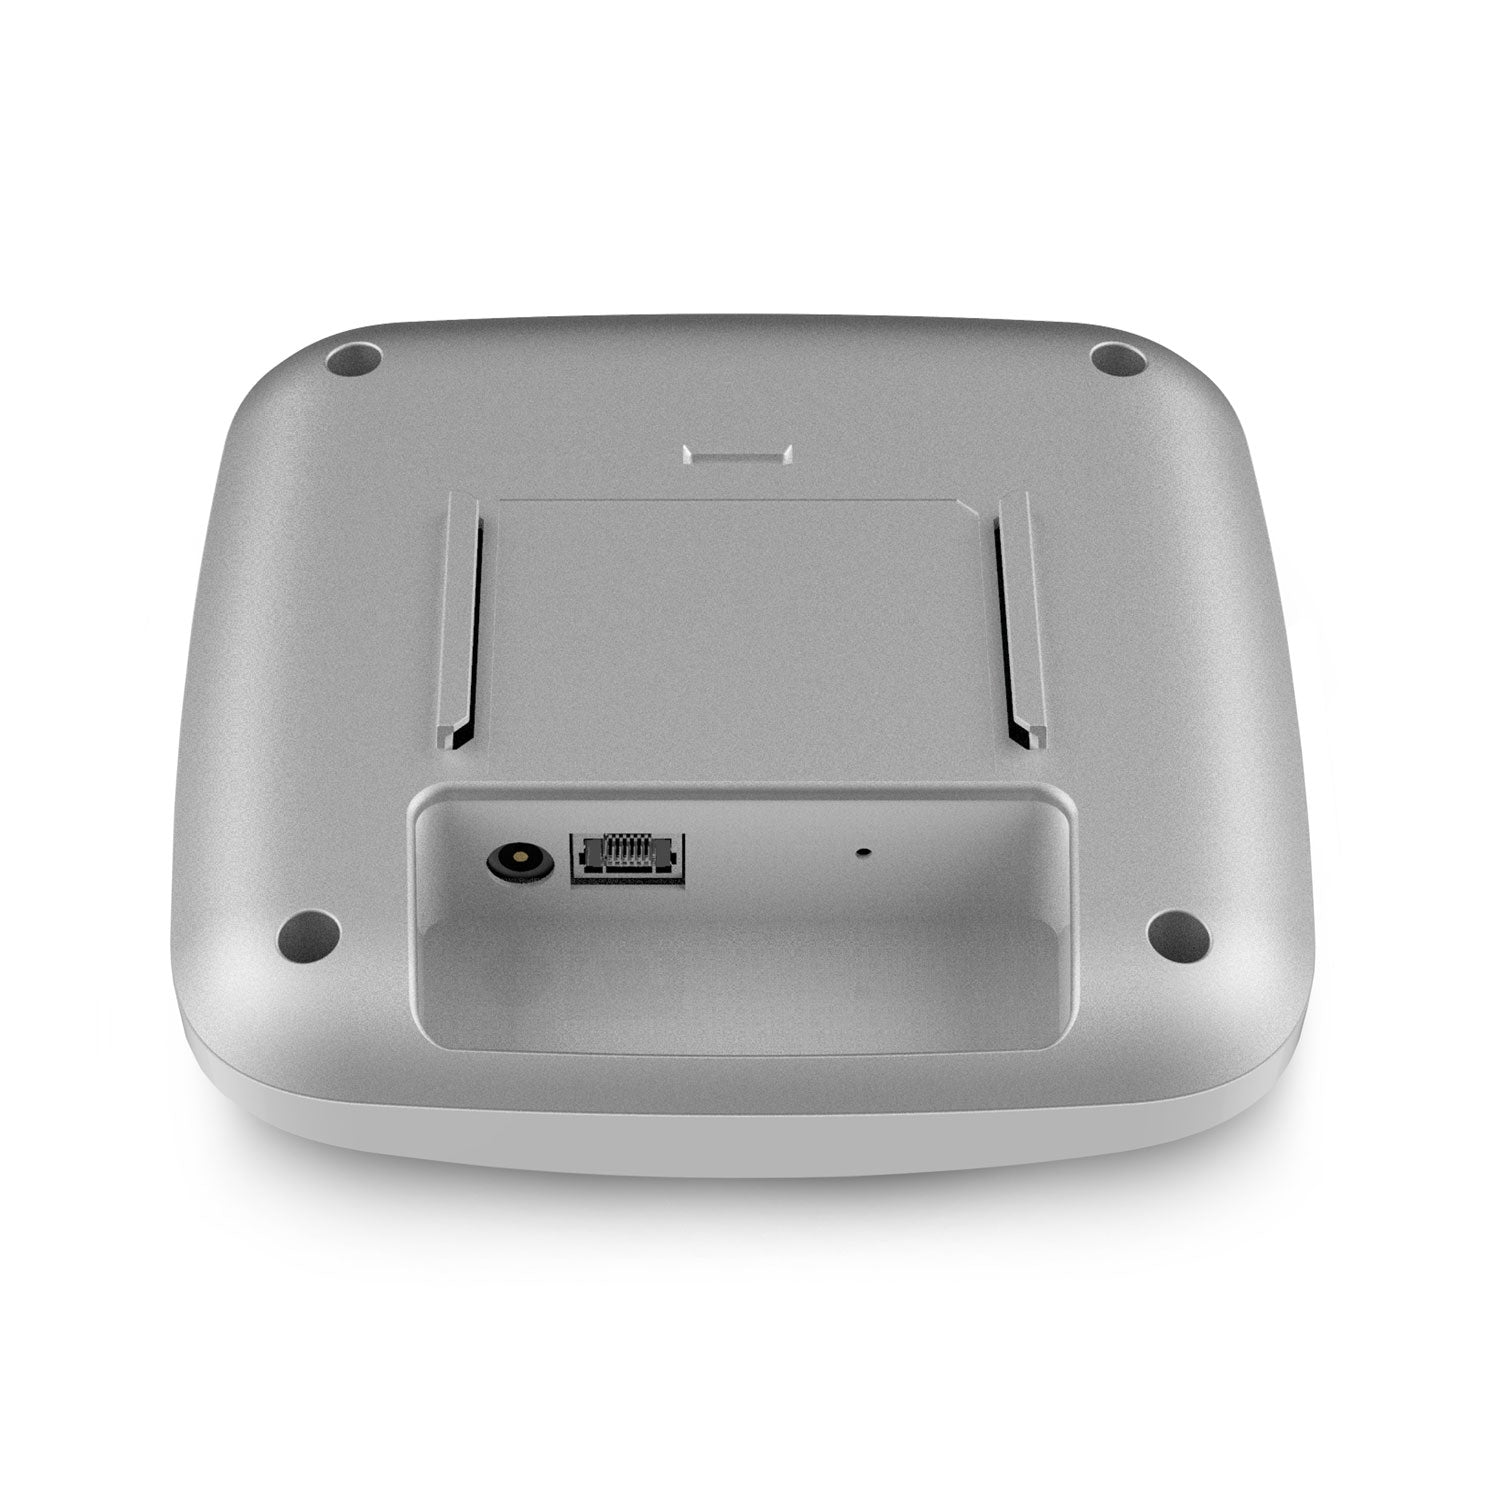 EWS356-FIT: EnGenius Fit 2×2 Indoor Wireless Wi-Fi 6 Access Point with  Adapter ($10 Value)